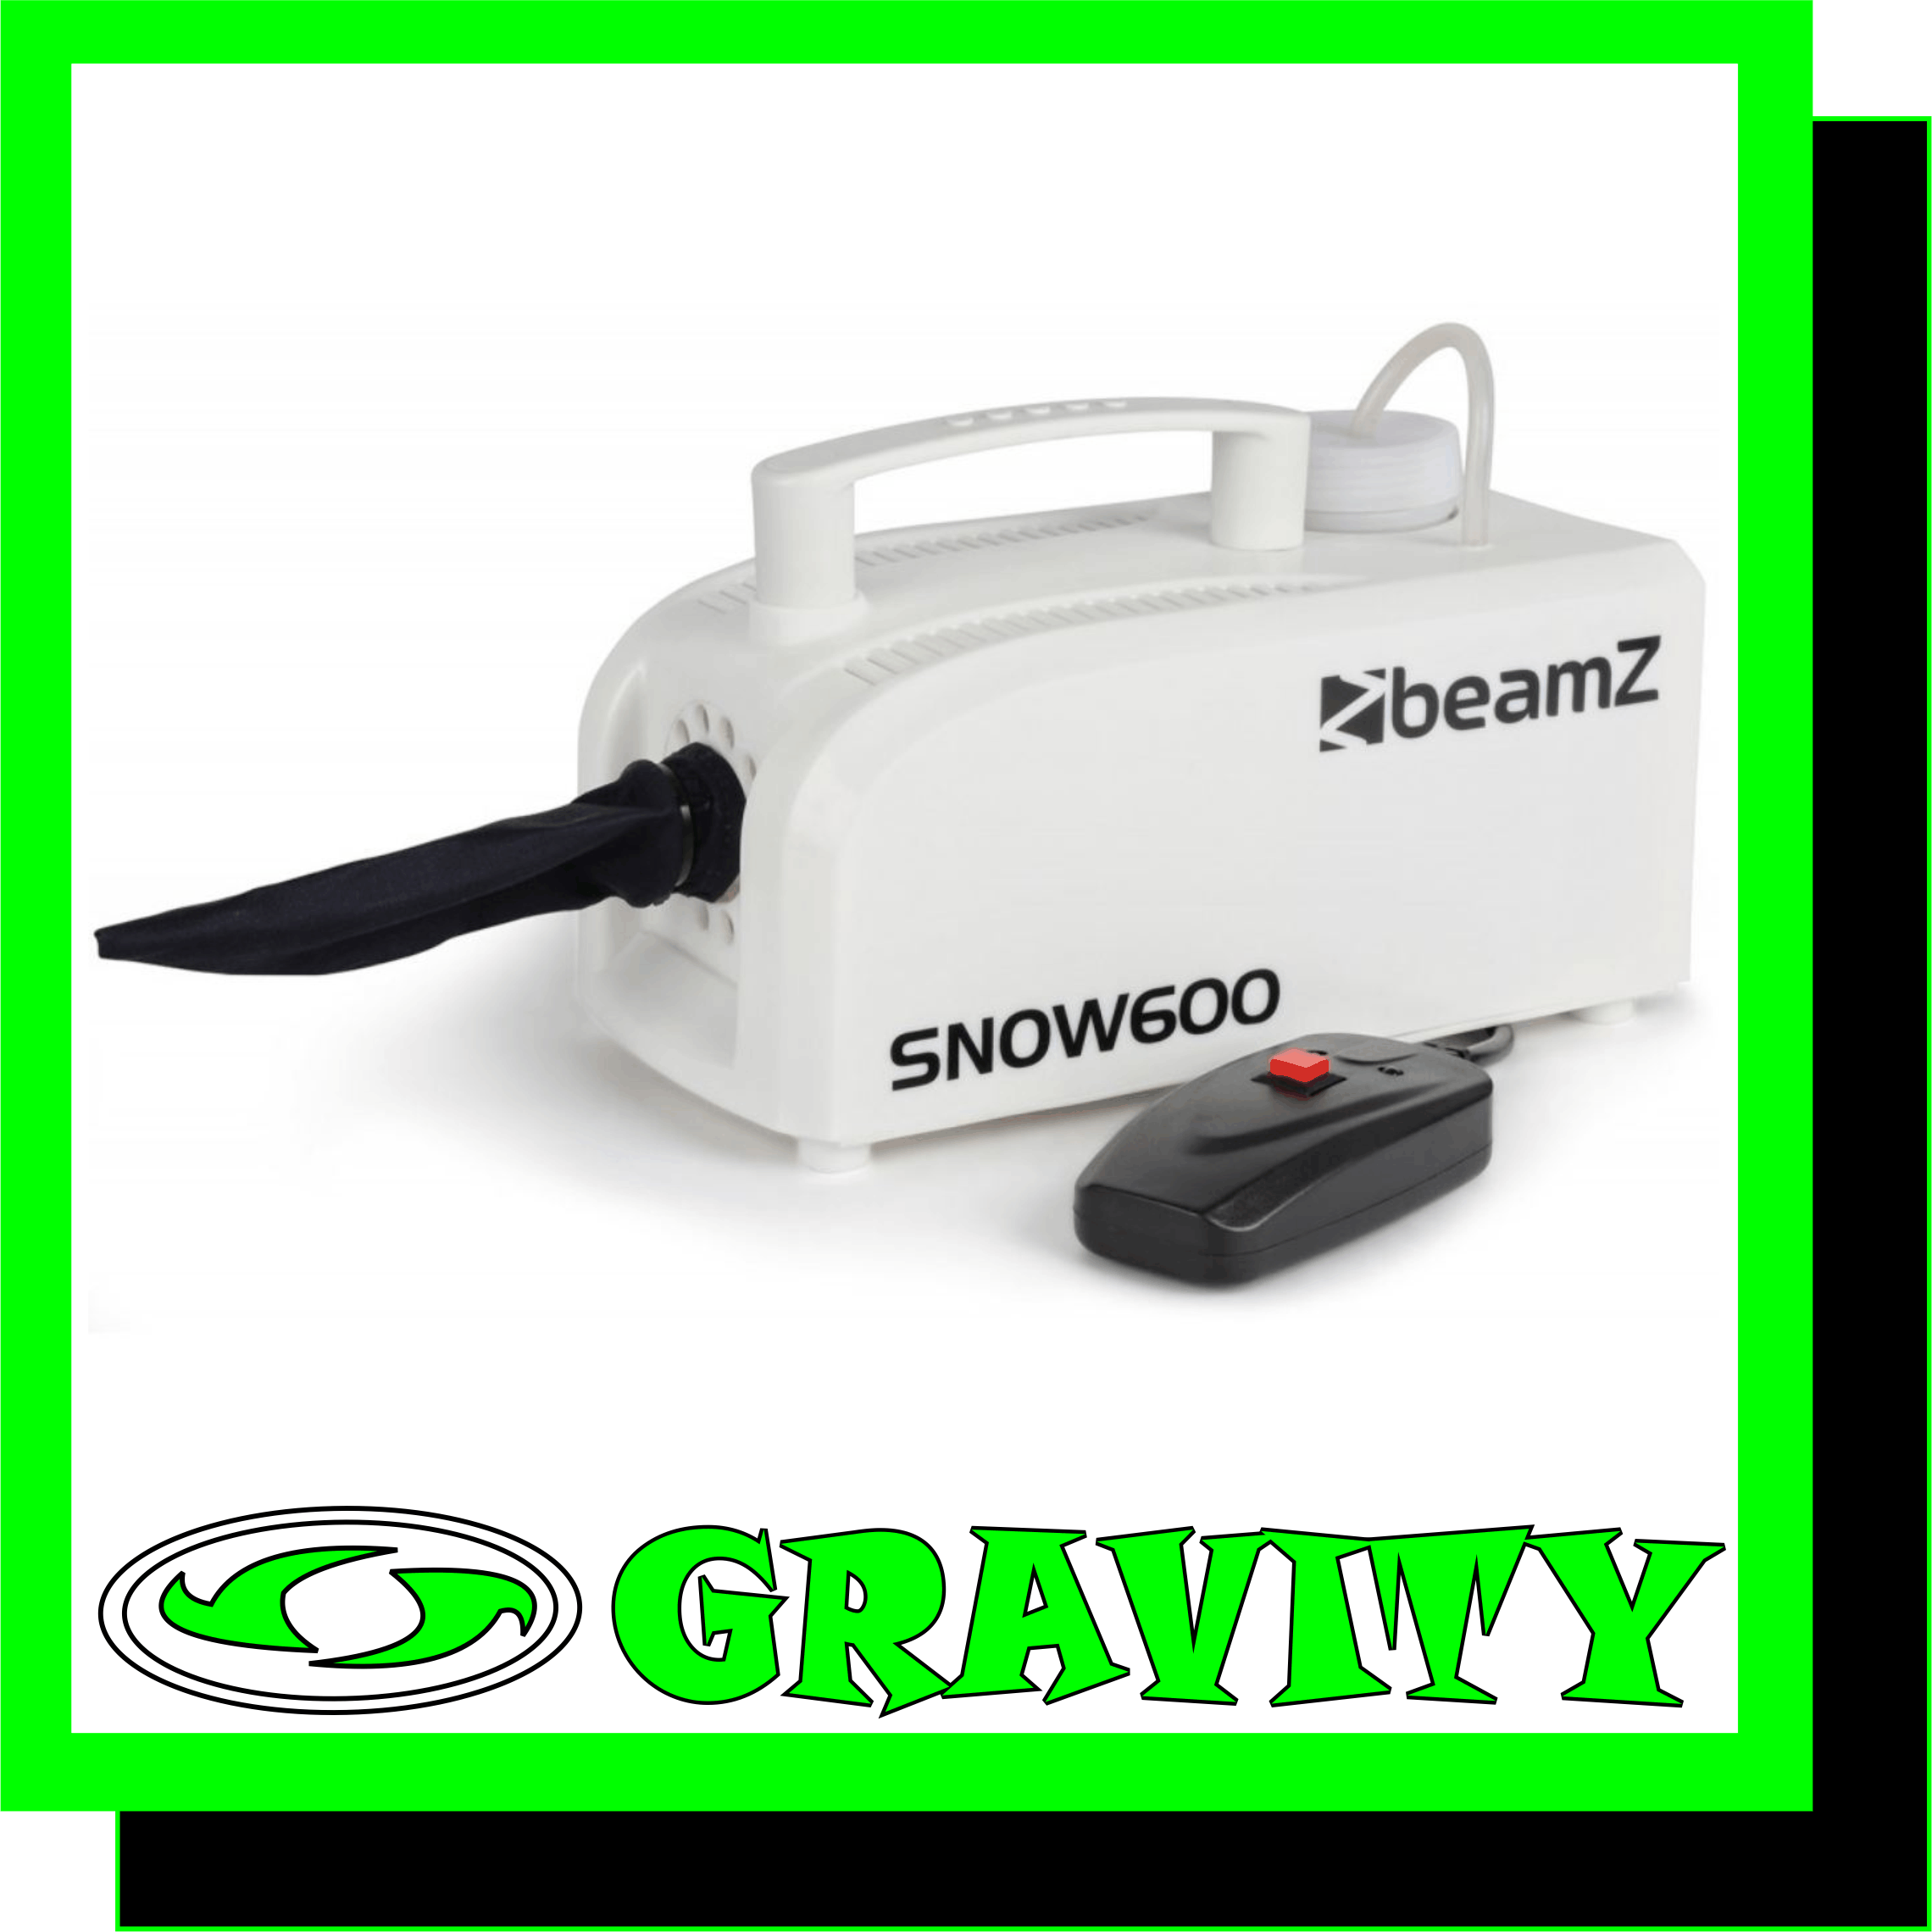 Details The Snow600 is a compact snow machine in a high quality plastic tooling with a tough ice white wipe clean finish. This snow machine is designed to create 'falling snow' effect. Because of the lightweight and compact design it's easy to carry. Supplied with an easy to use remote control attached with a 5m wire. This machine is ideal for home party use and seasonal events like Christmas.  -Falling snowflakes effect -Remote control with 5m cable -Effect distance +-3m -Built-in 0.25L tank -Easy to carry due it's compact design